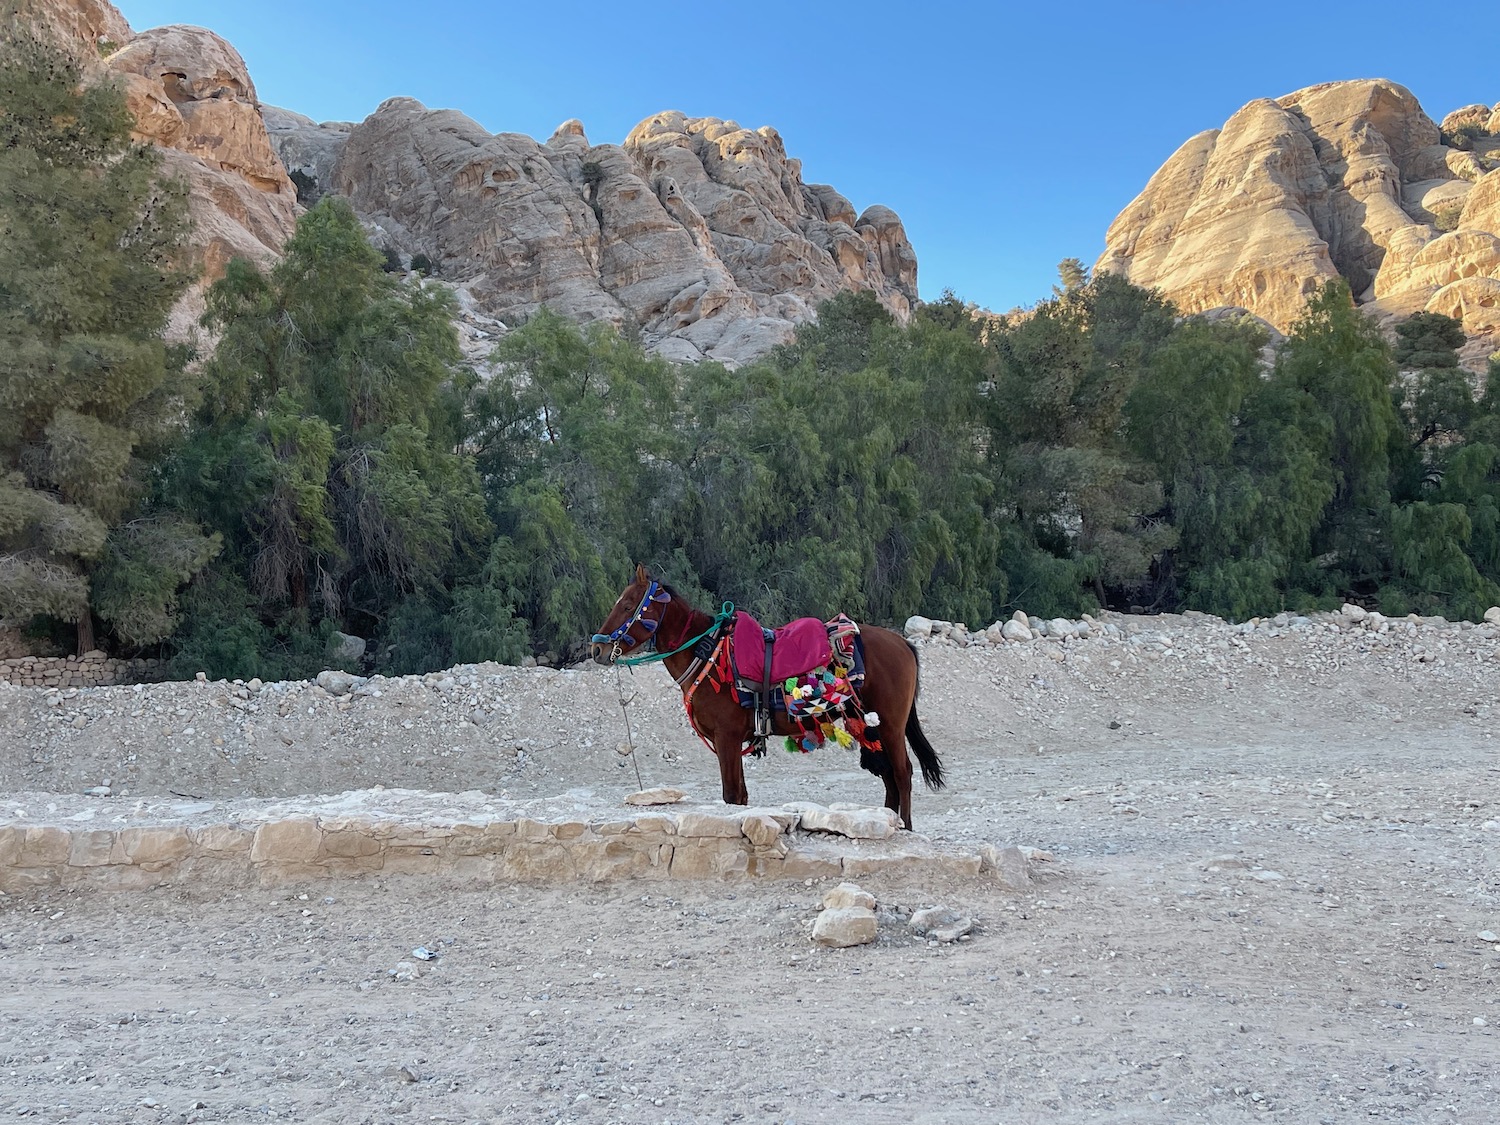 a horse with a blanket on its back standing in a rocky area